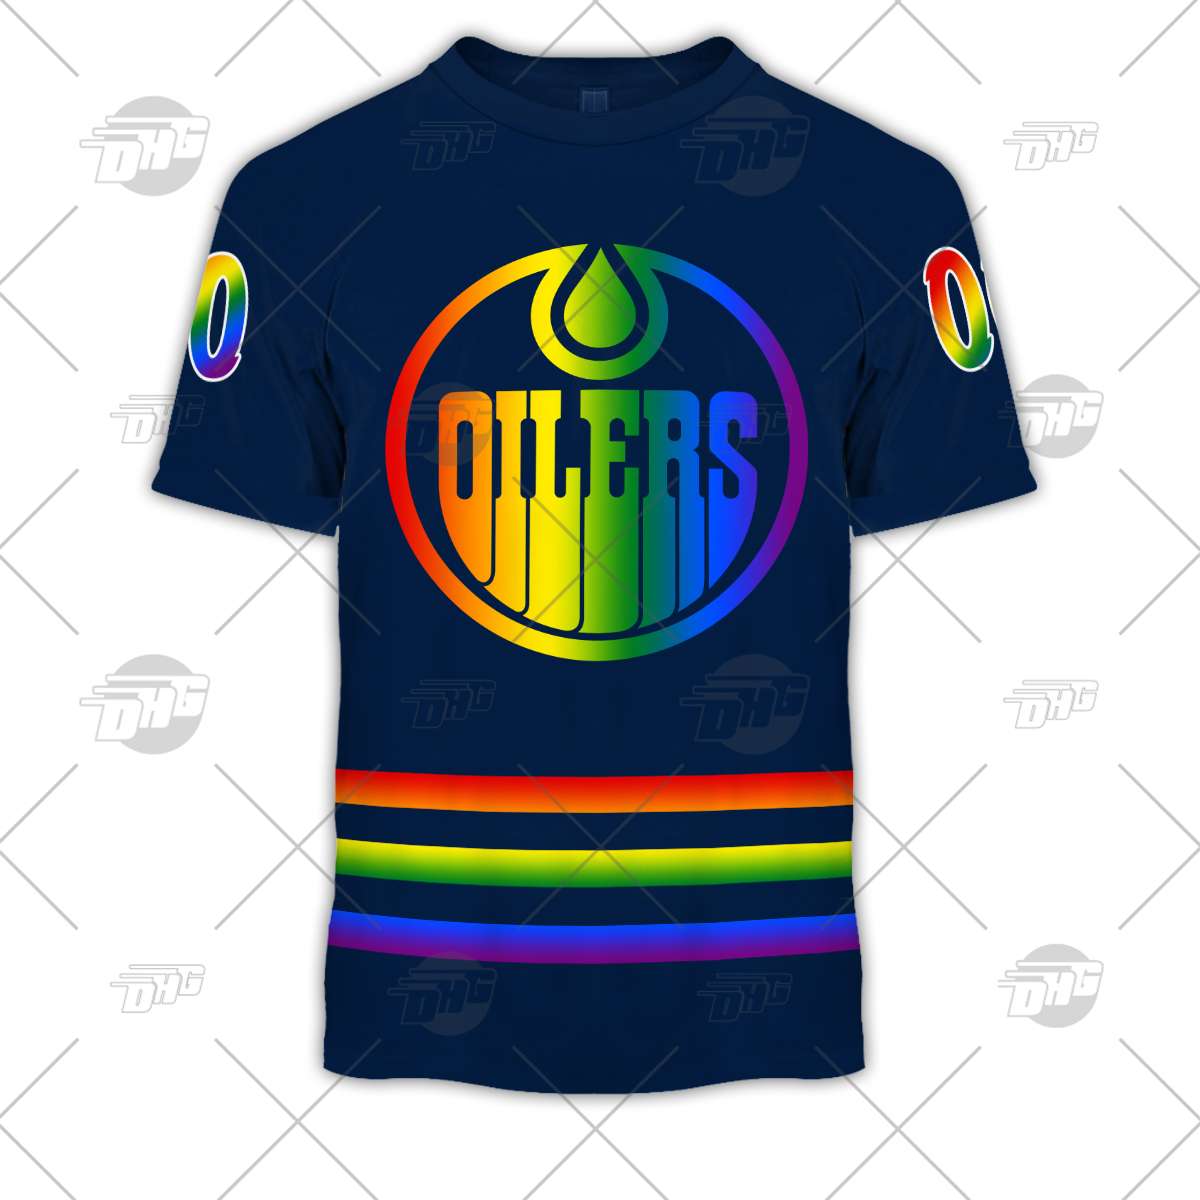 Personalized NHL Edmonton Oilers Hoodie Special Design For Pride